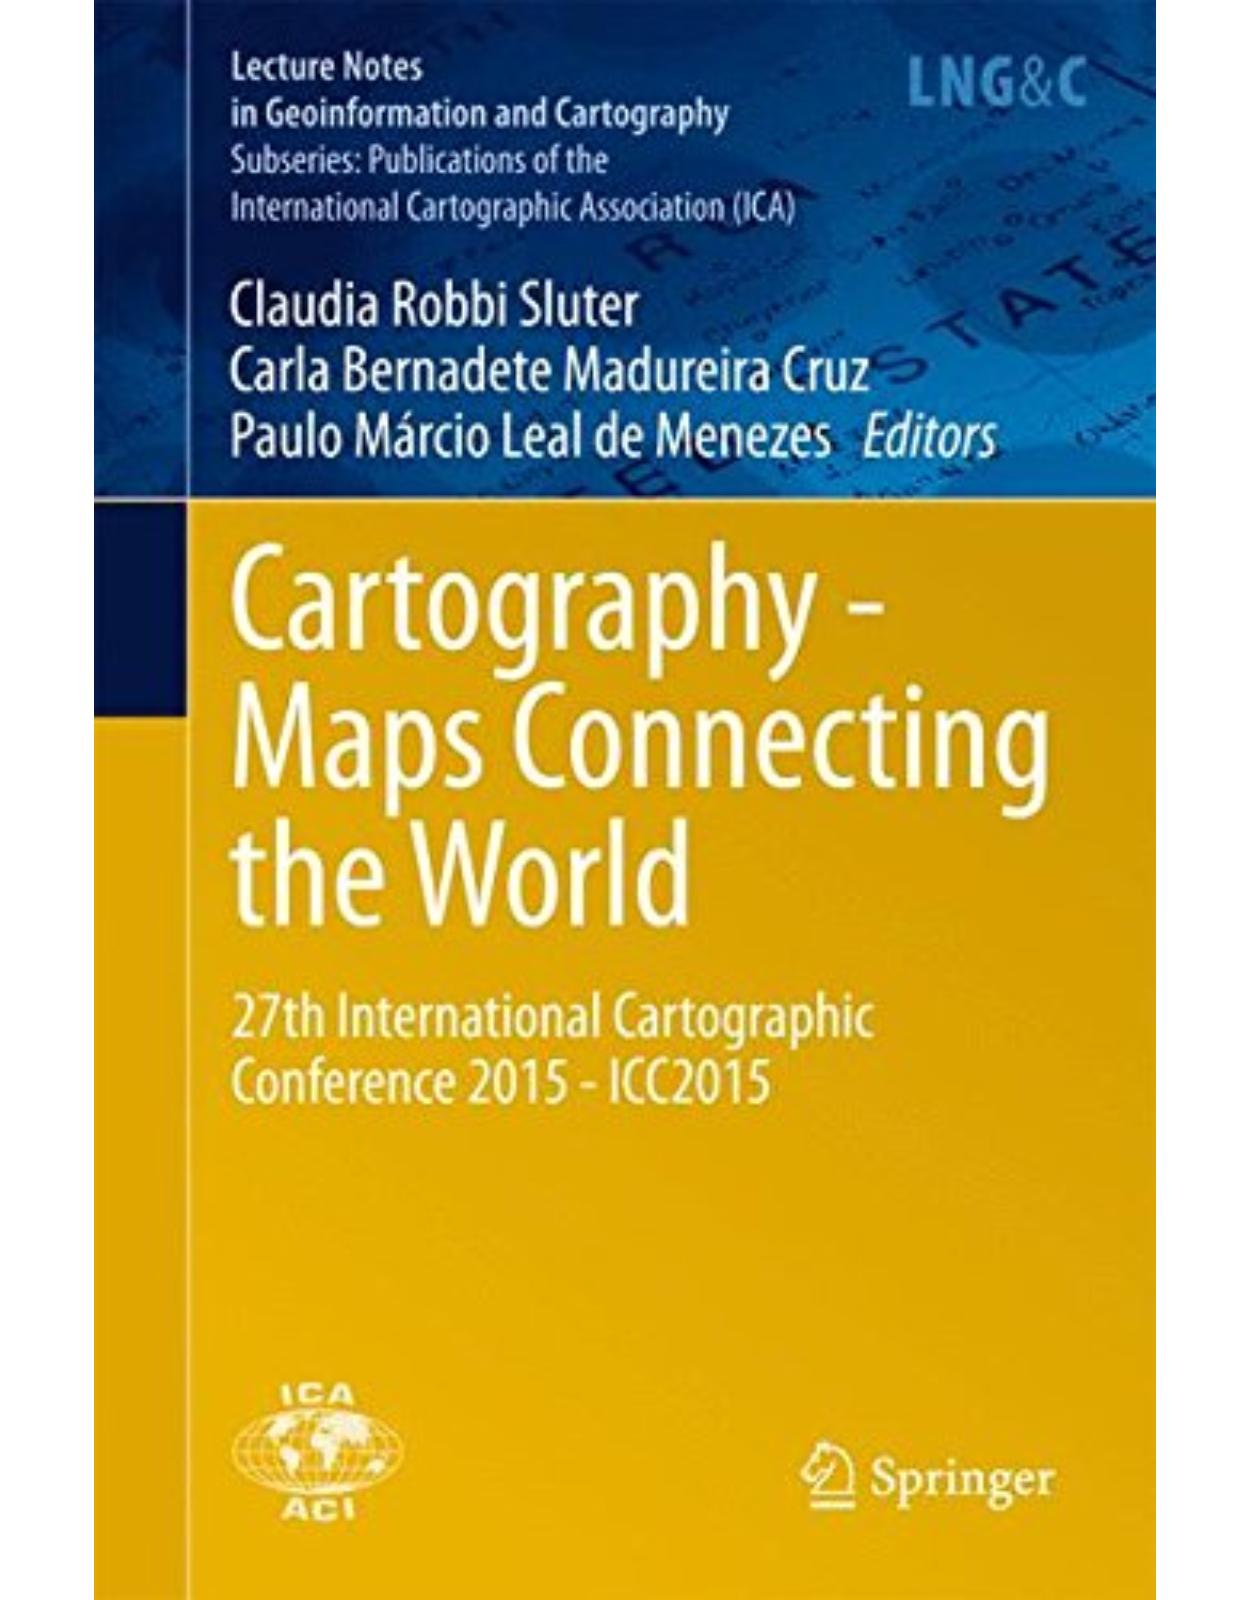 Cartography - Maps Connecting the World